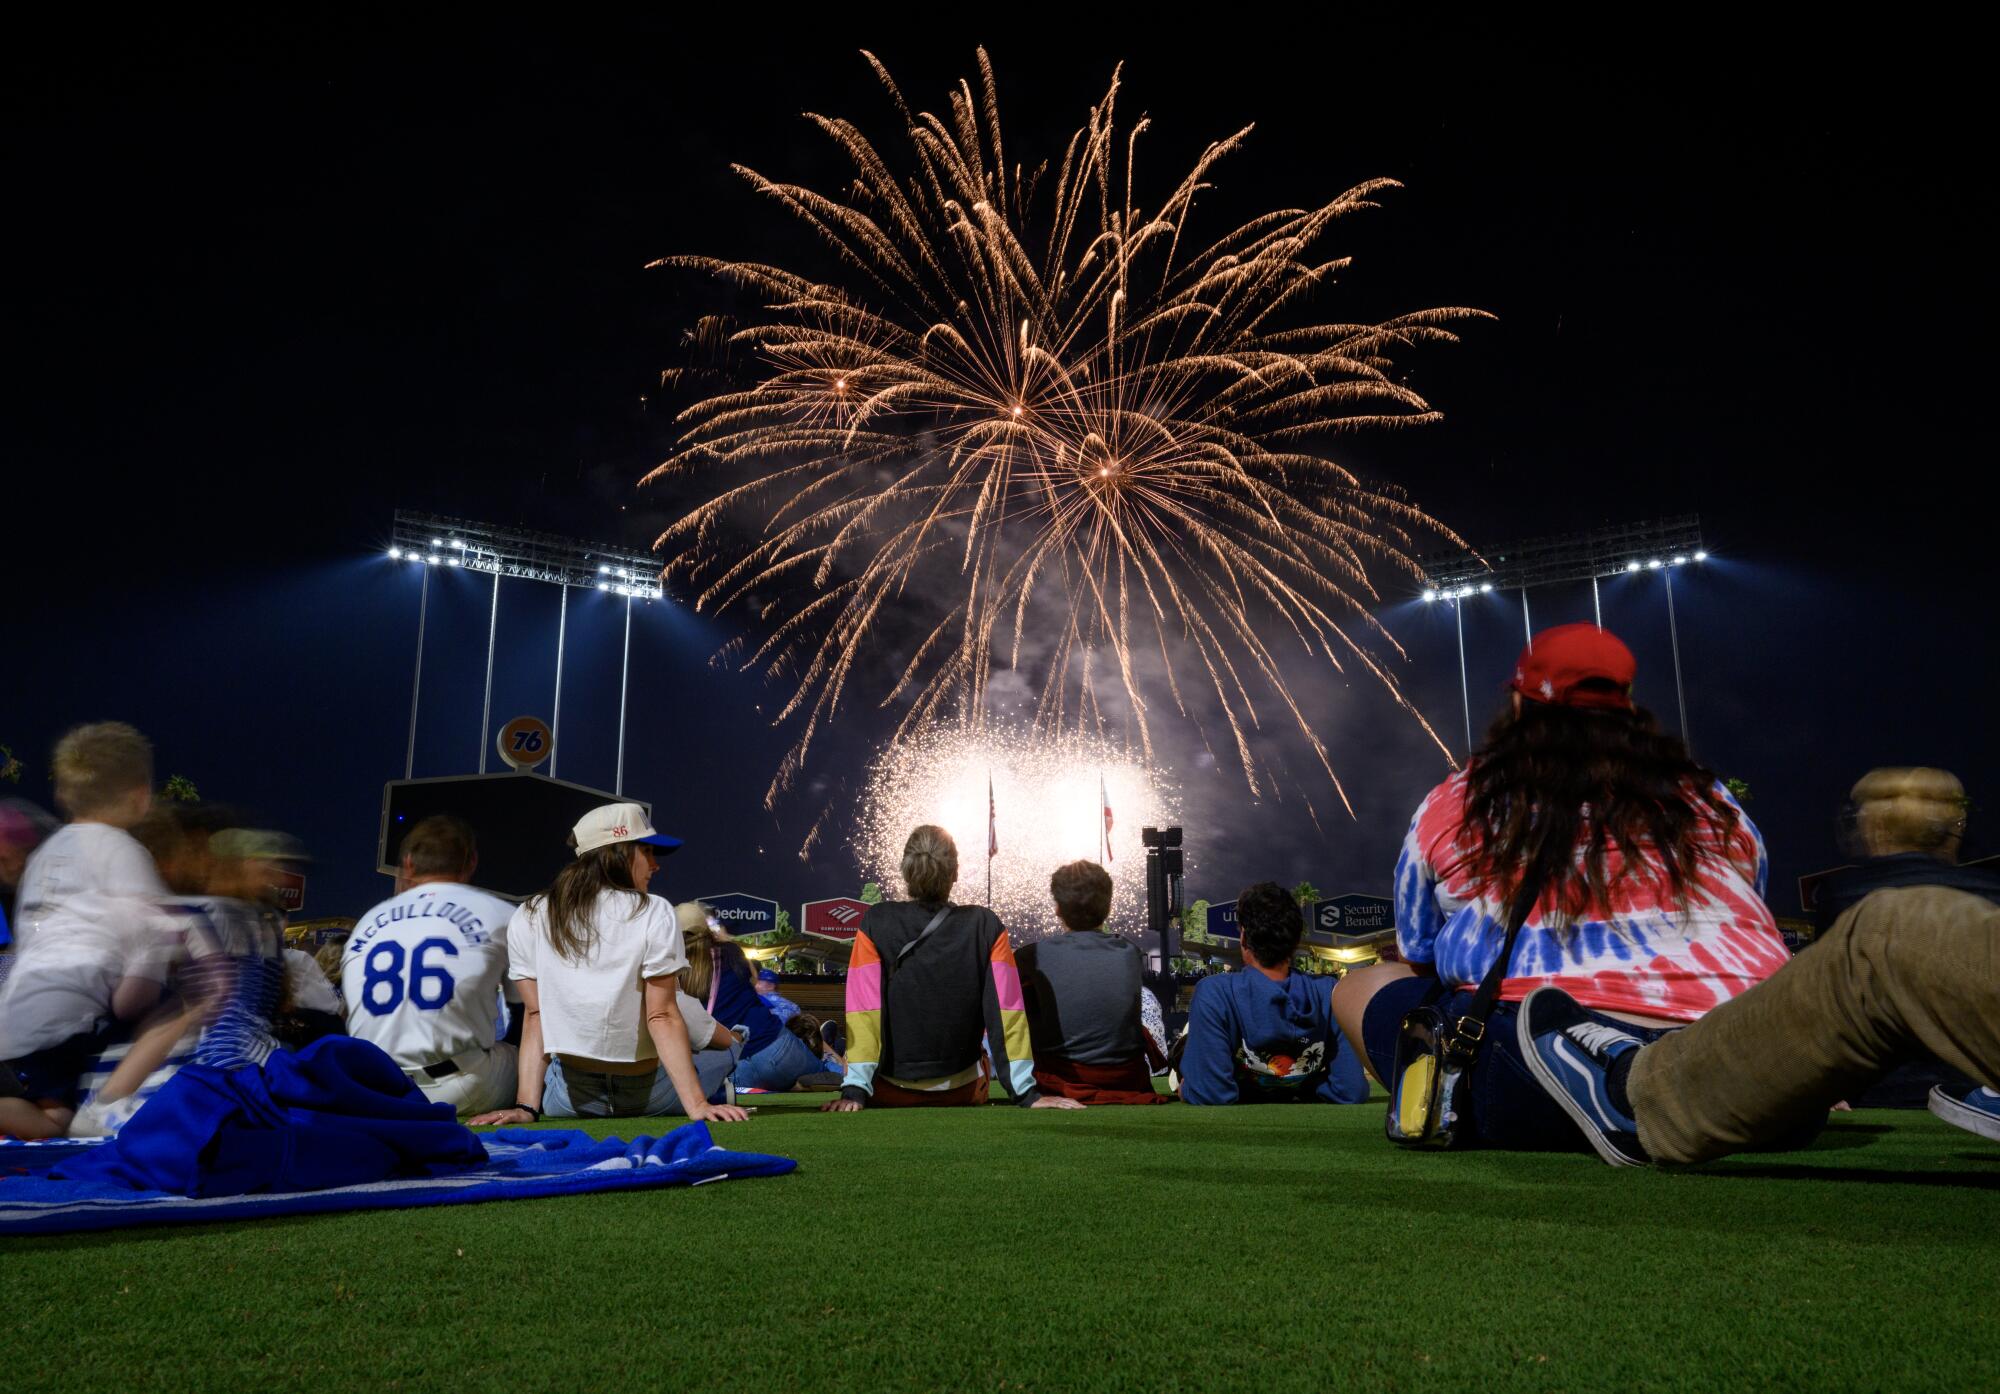 Fans watch the Fourth of July fireworks show at Dodger Stadium following Thursday's game.